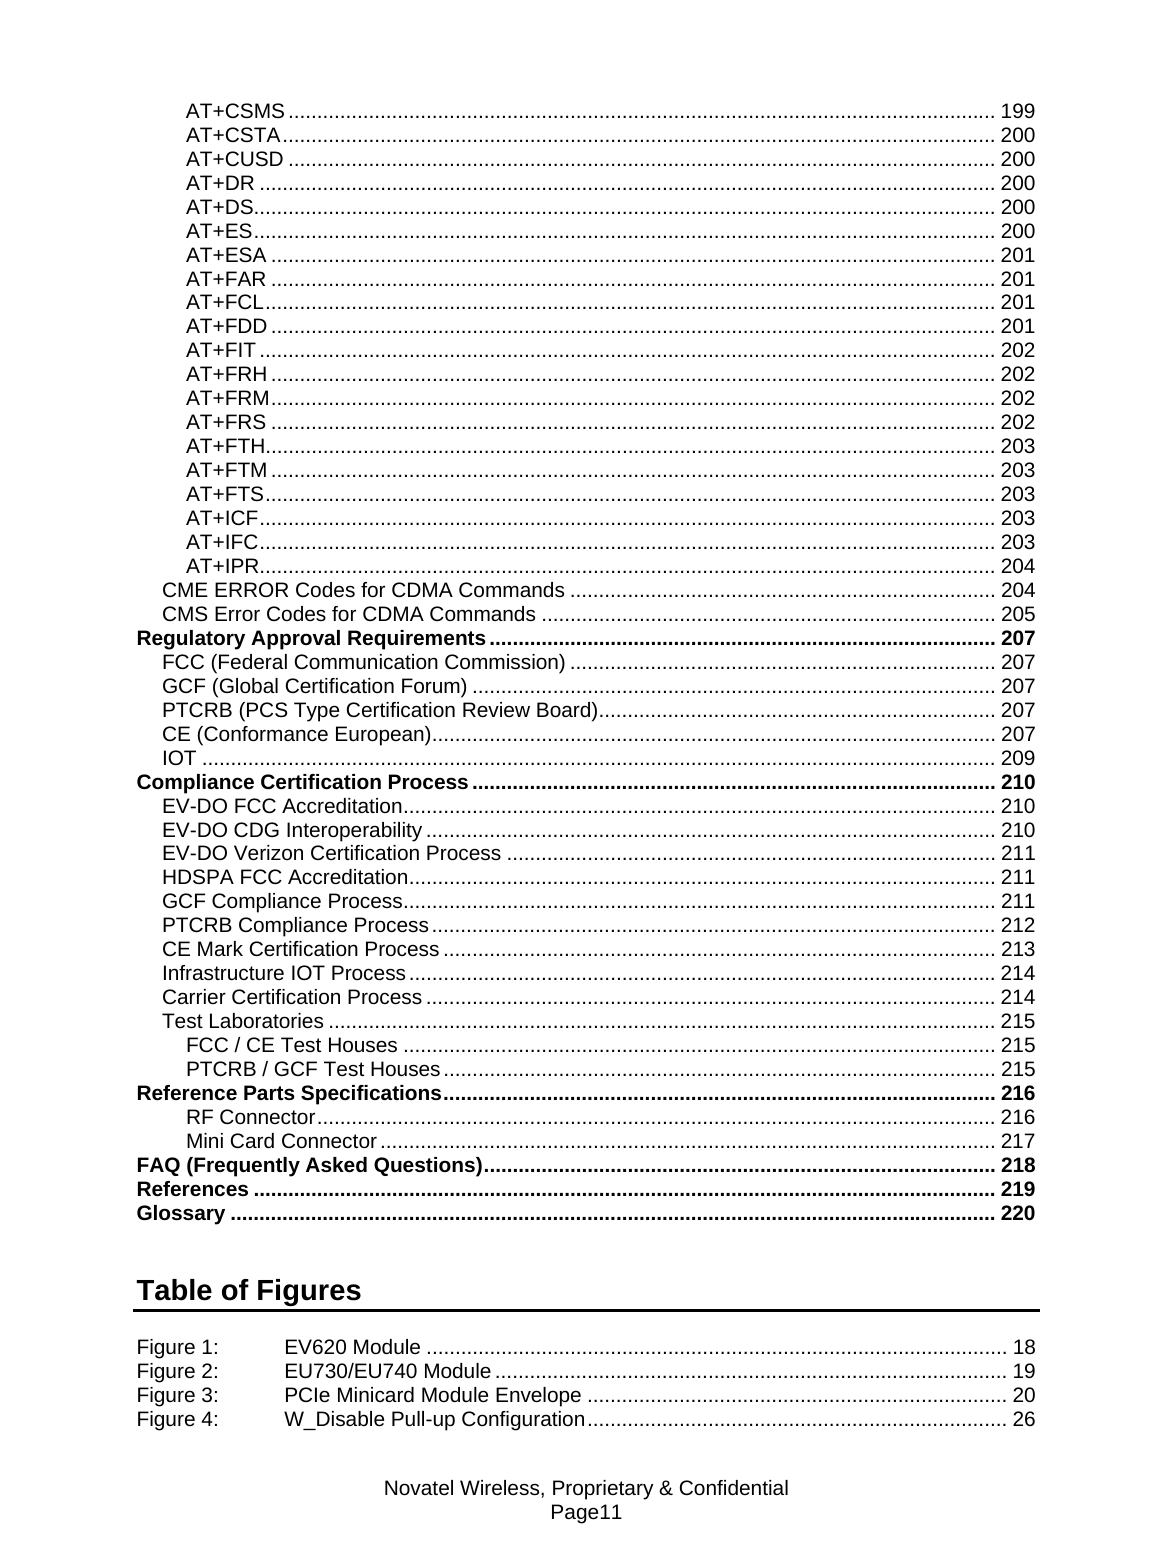 Novatel Wireless, Proprietary &amp; Confidential Page11 AT+CSMS ........................................................................................................................... 199 AT+CSTA............................................................................................................................ 200 AT+CUSD ........................................................................................................................... 200 AT+DR ................................................................................................................................ 200 AT+DS................................................................................................................................. 200 AT+ES................................................................................................................................. 200 AT+ESA .............................................................................................................................. 201 AT+FAR .............................................................................................................................. 201 AT+FCL............................................................................................................................... 201 AT+FDD .............................................................................................................................. 201 AT+FIT ................................................................................................................................ 202 AT+FRH .............................................................................................................................. 202 AT+FRM.............................................................................................................................. 202 AT+FRS .............................................................................................................................. 202 AT+FTH............................................................................................................................... 203 AT+FTM .............................................................................................................................. 203 AT+FTS............................................................................................................................... 203 AT+ICF................................................................................................................................ 203 AT+IFC................................................................................................................................ 203 AT+IPR................................................................................................................................ 204 CME ERROR Codes for CDMA Commands .......................................................................... 204 CMS Error Codes for CDMA Commands ............................................................................... 205 Regulatory Approval Requirements ........................................................................................ 207 FCC (Federal Communication Commission) .......................................................................... 207 GCF (Global Certification Forum) ........................................................................................... 207 PTCRB (PCS Type Certification Review Board)..................................................................... 207 CE (Conformance European).................................................................................................. 207 IOT .......................................................................................................................................... 209 Compliance Certification Process........................................................................................... 210 EV-DO FCC Accreditation....................................................................................................... 210 EV-DO CDG Interoperability ................................................................................................... 210 EV-DO Verizon Certification Process ..................................................................................... 211 HDSPA FCC Accreditation...................................................................................................... 211 GCF Compliance Process....................................................................................................... 211 PTCRB Compliance Process.................................................................................................. 212 CE Mark Certification Process ................................................................................................ 213 Infrastructure IOT Process...................................................................................................... 214 Carrier Certification Process ................................................................................................... 214 Test Laboratories .................................................................................................................... 215 FCC / CE Test Houses ....................................................................................................... 215 PTCRB / GCF Test Houses................................................................................................ 215 Reference Parts Specifications................................................................................................ 216 RF Connector...................................................................................................................... 216 Mini Card Connector ........................................................................................................... 217 FAQ (Frequently Asked Questions)......................................................................................... 218 References ................................................................................................................................. 219 Glossary ..................................................................................................................................... 220   Table of Figures  Figure 1: EV620 Module ..................................................................................................... 18 Figure 2: EU730/EU740 Module ......................................................................................... 19 Figure 3: PCIe Minicard Module Envelope ......................................................................... 20 Figure 4: W_Disable Pull-up Configuration......................................................................... 26 